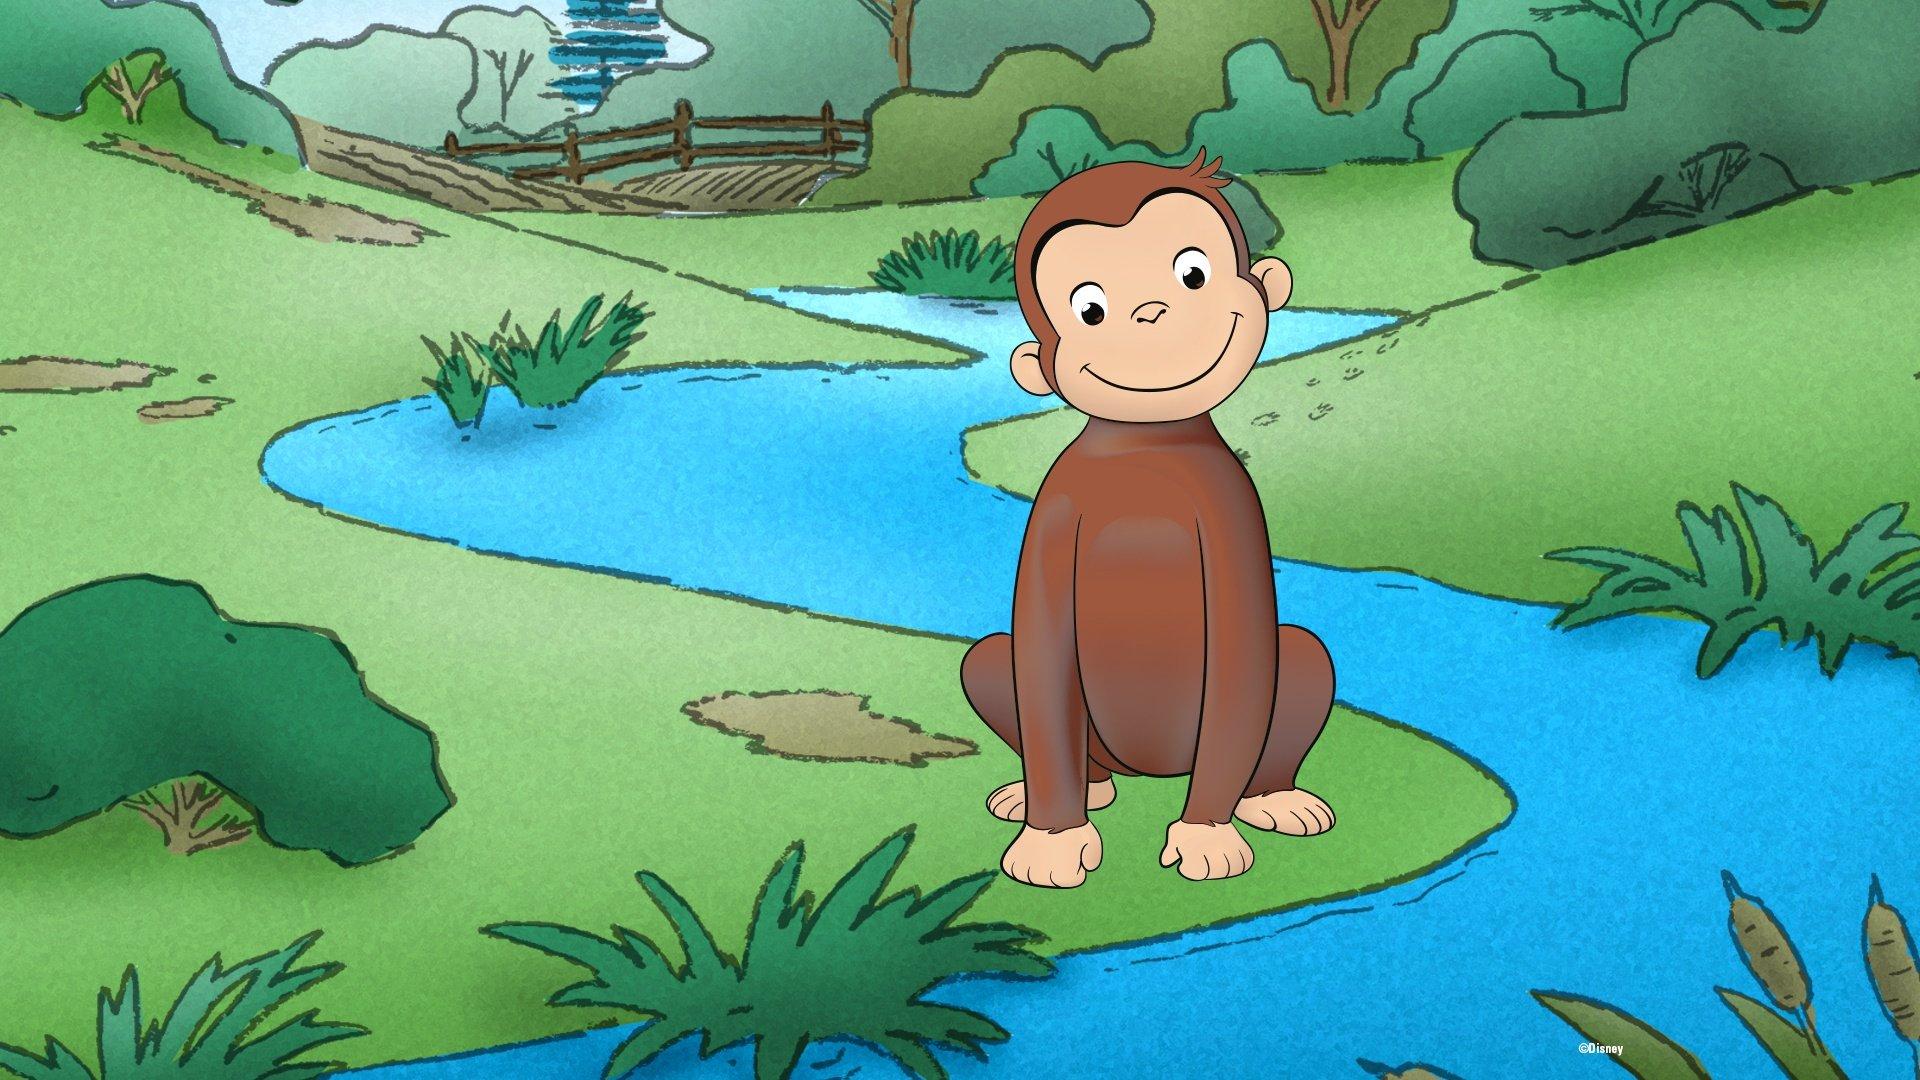 Curioso come George - Stag. 1 Ep. 21